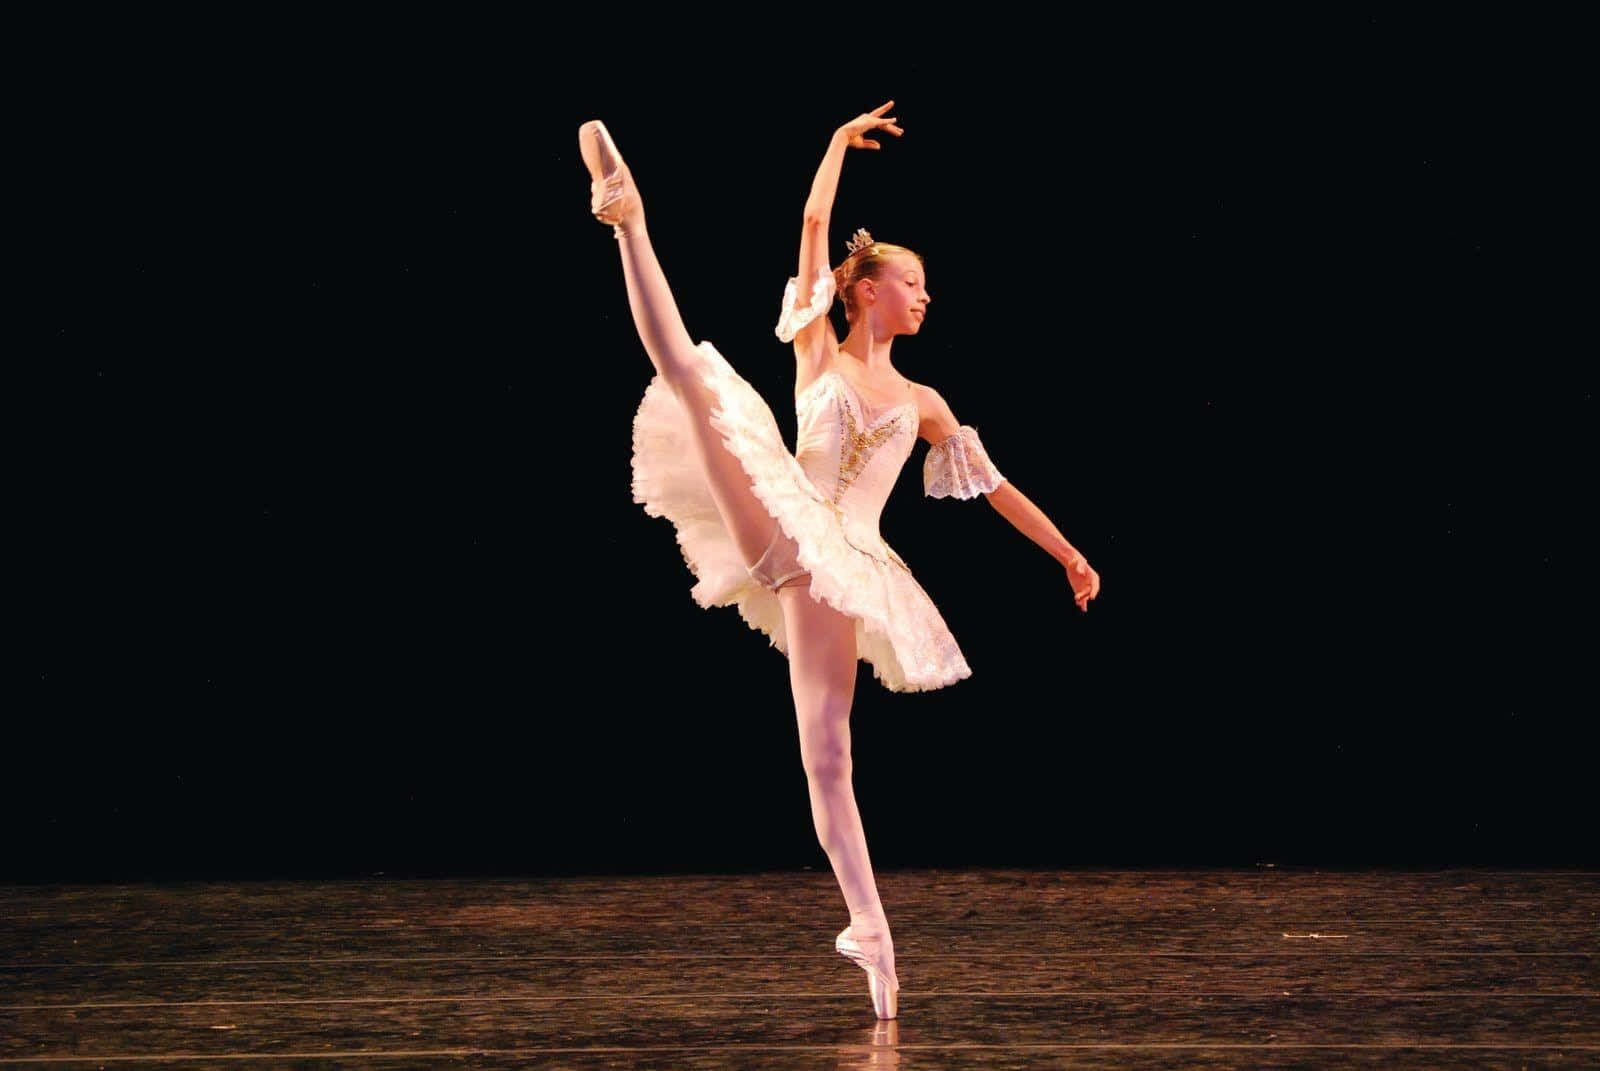 A Young Female Ballet Dancer In White On A Stage